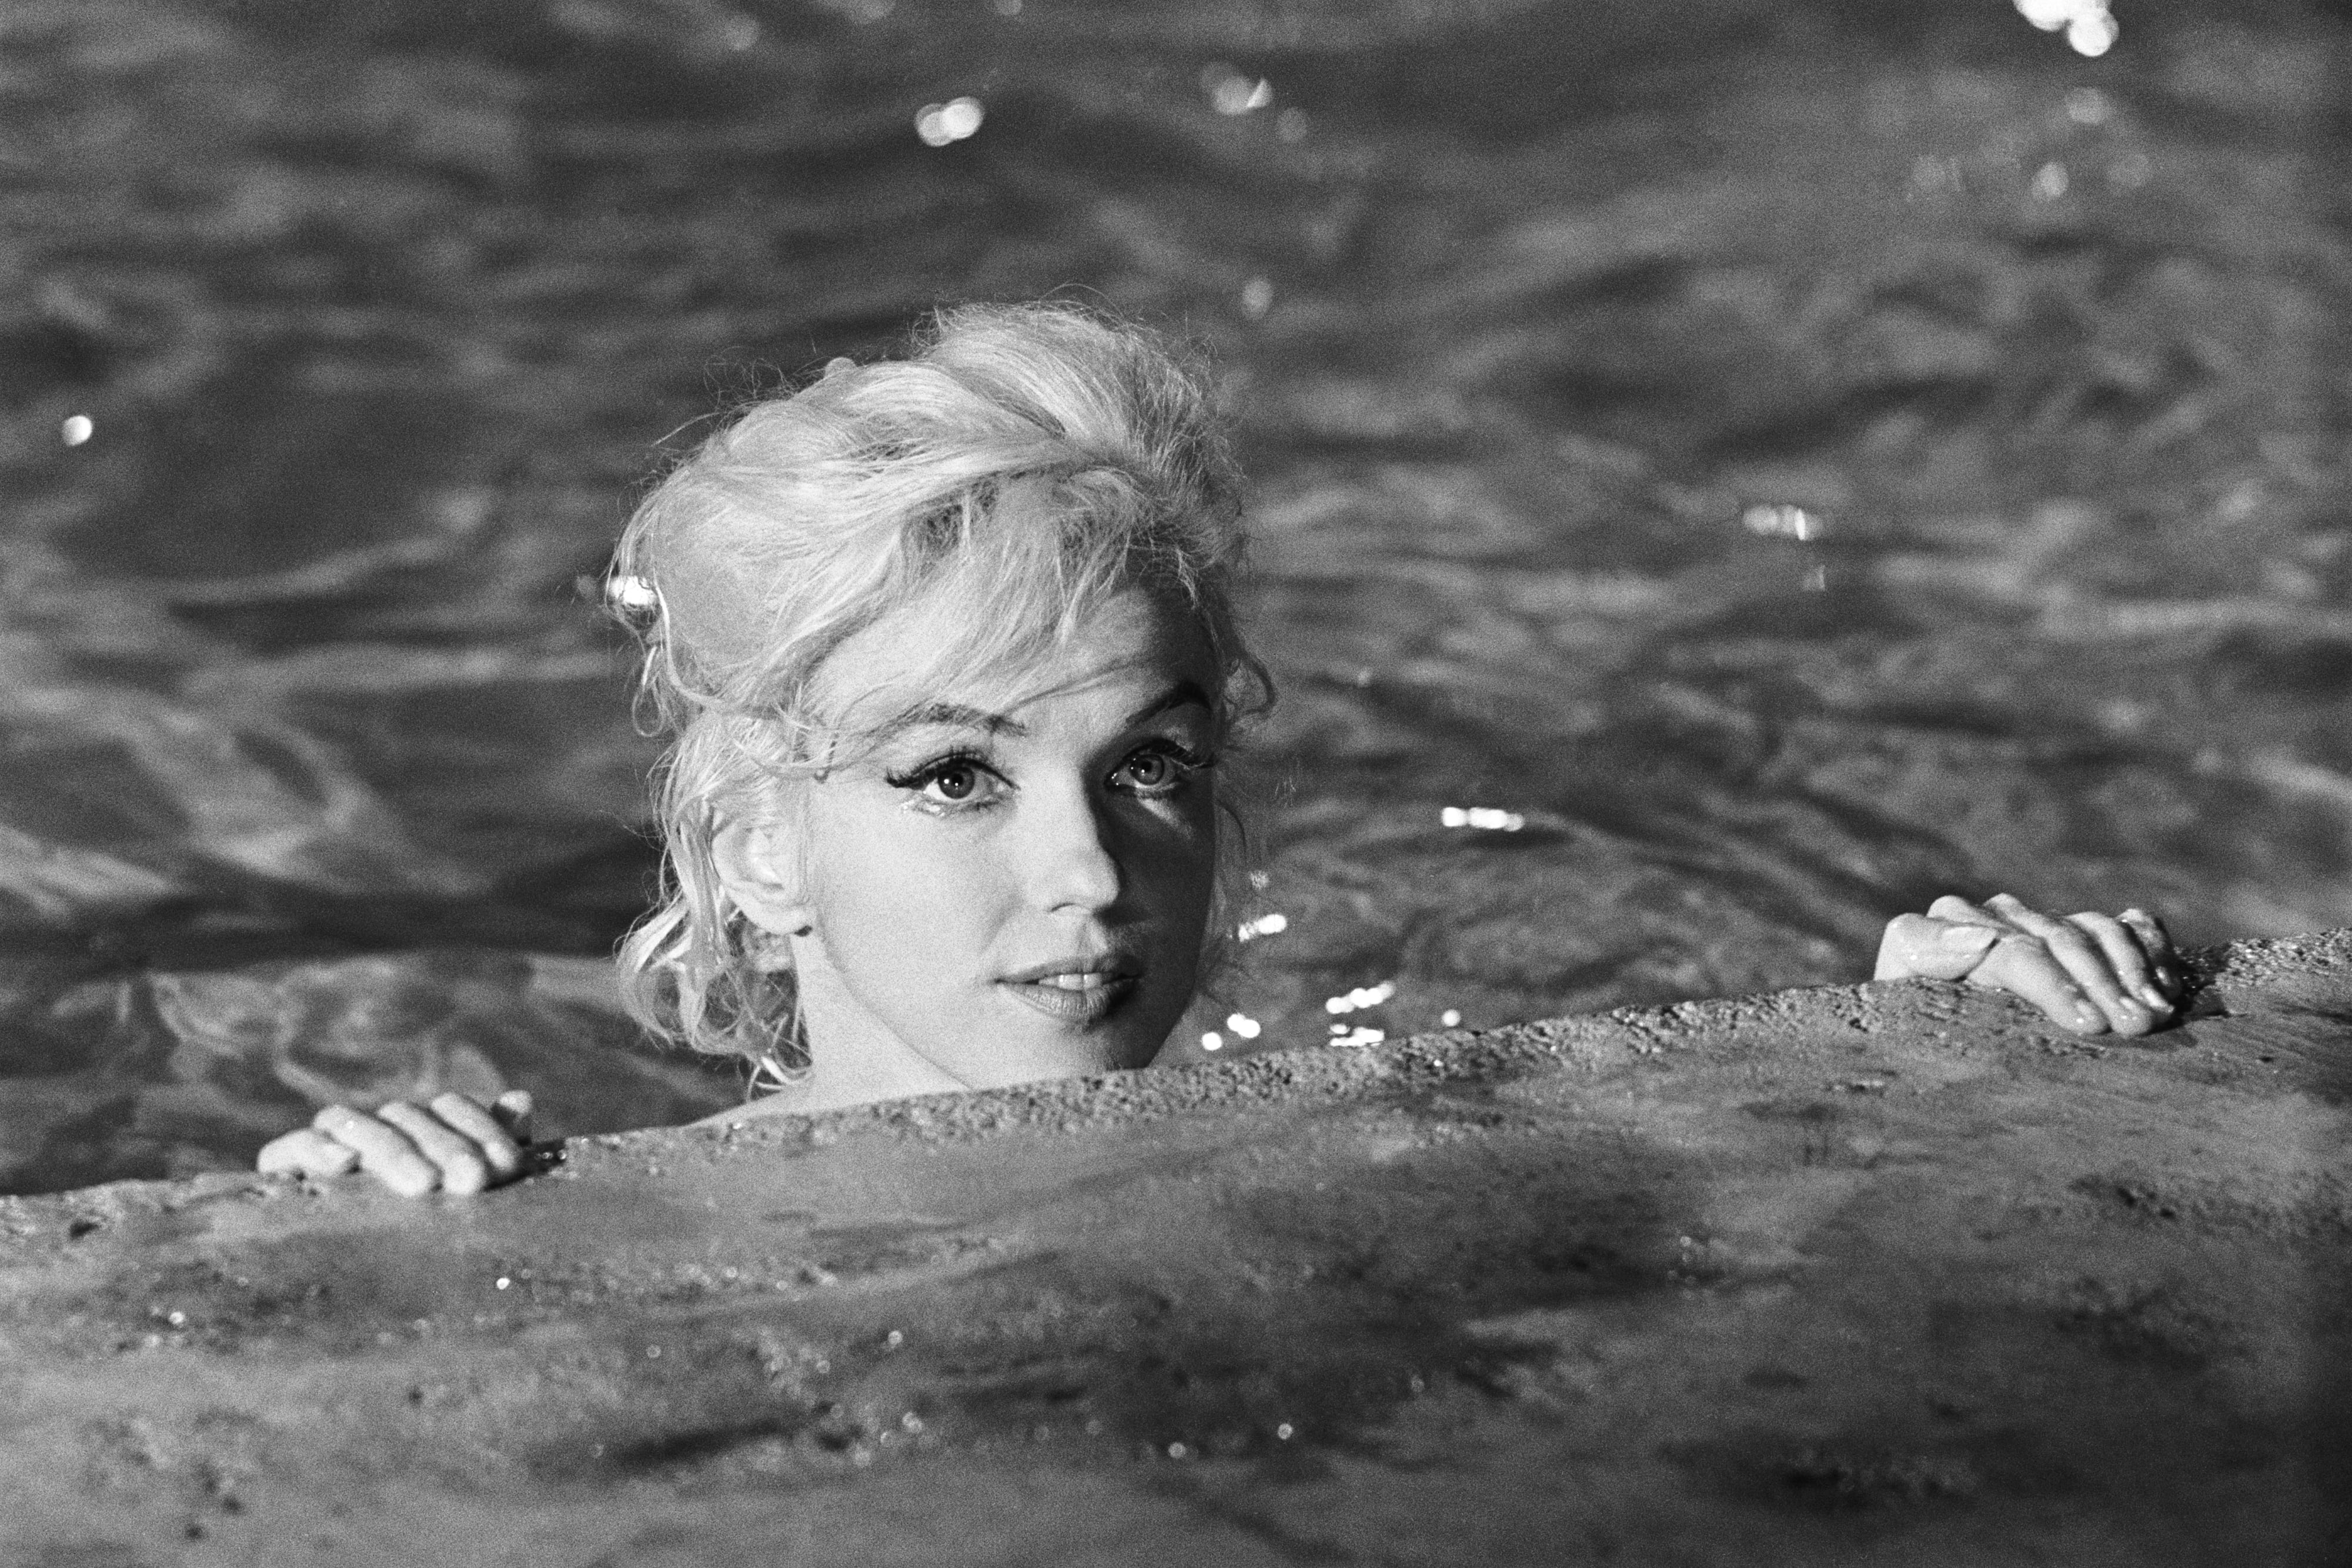 Coming soon: Lawrence Schiller - Marilyn & Me